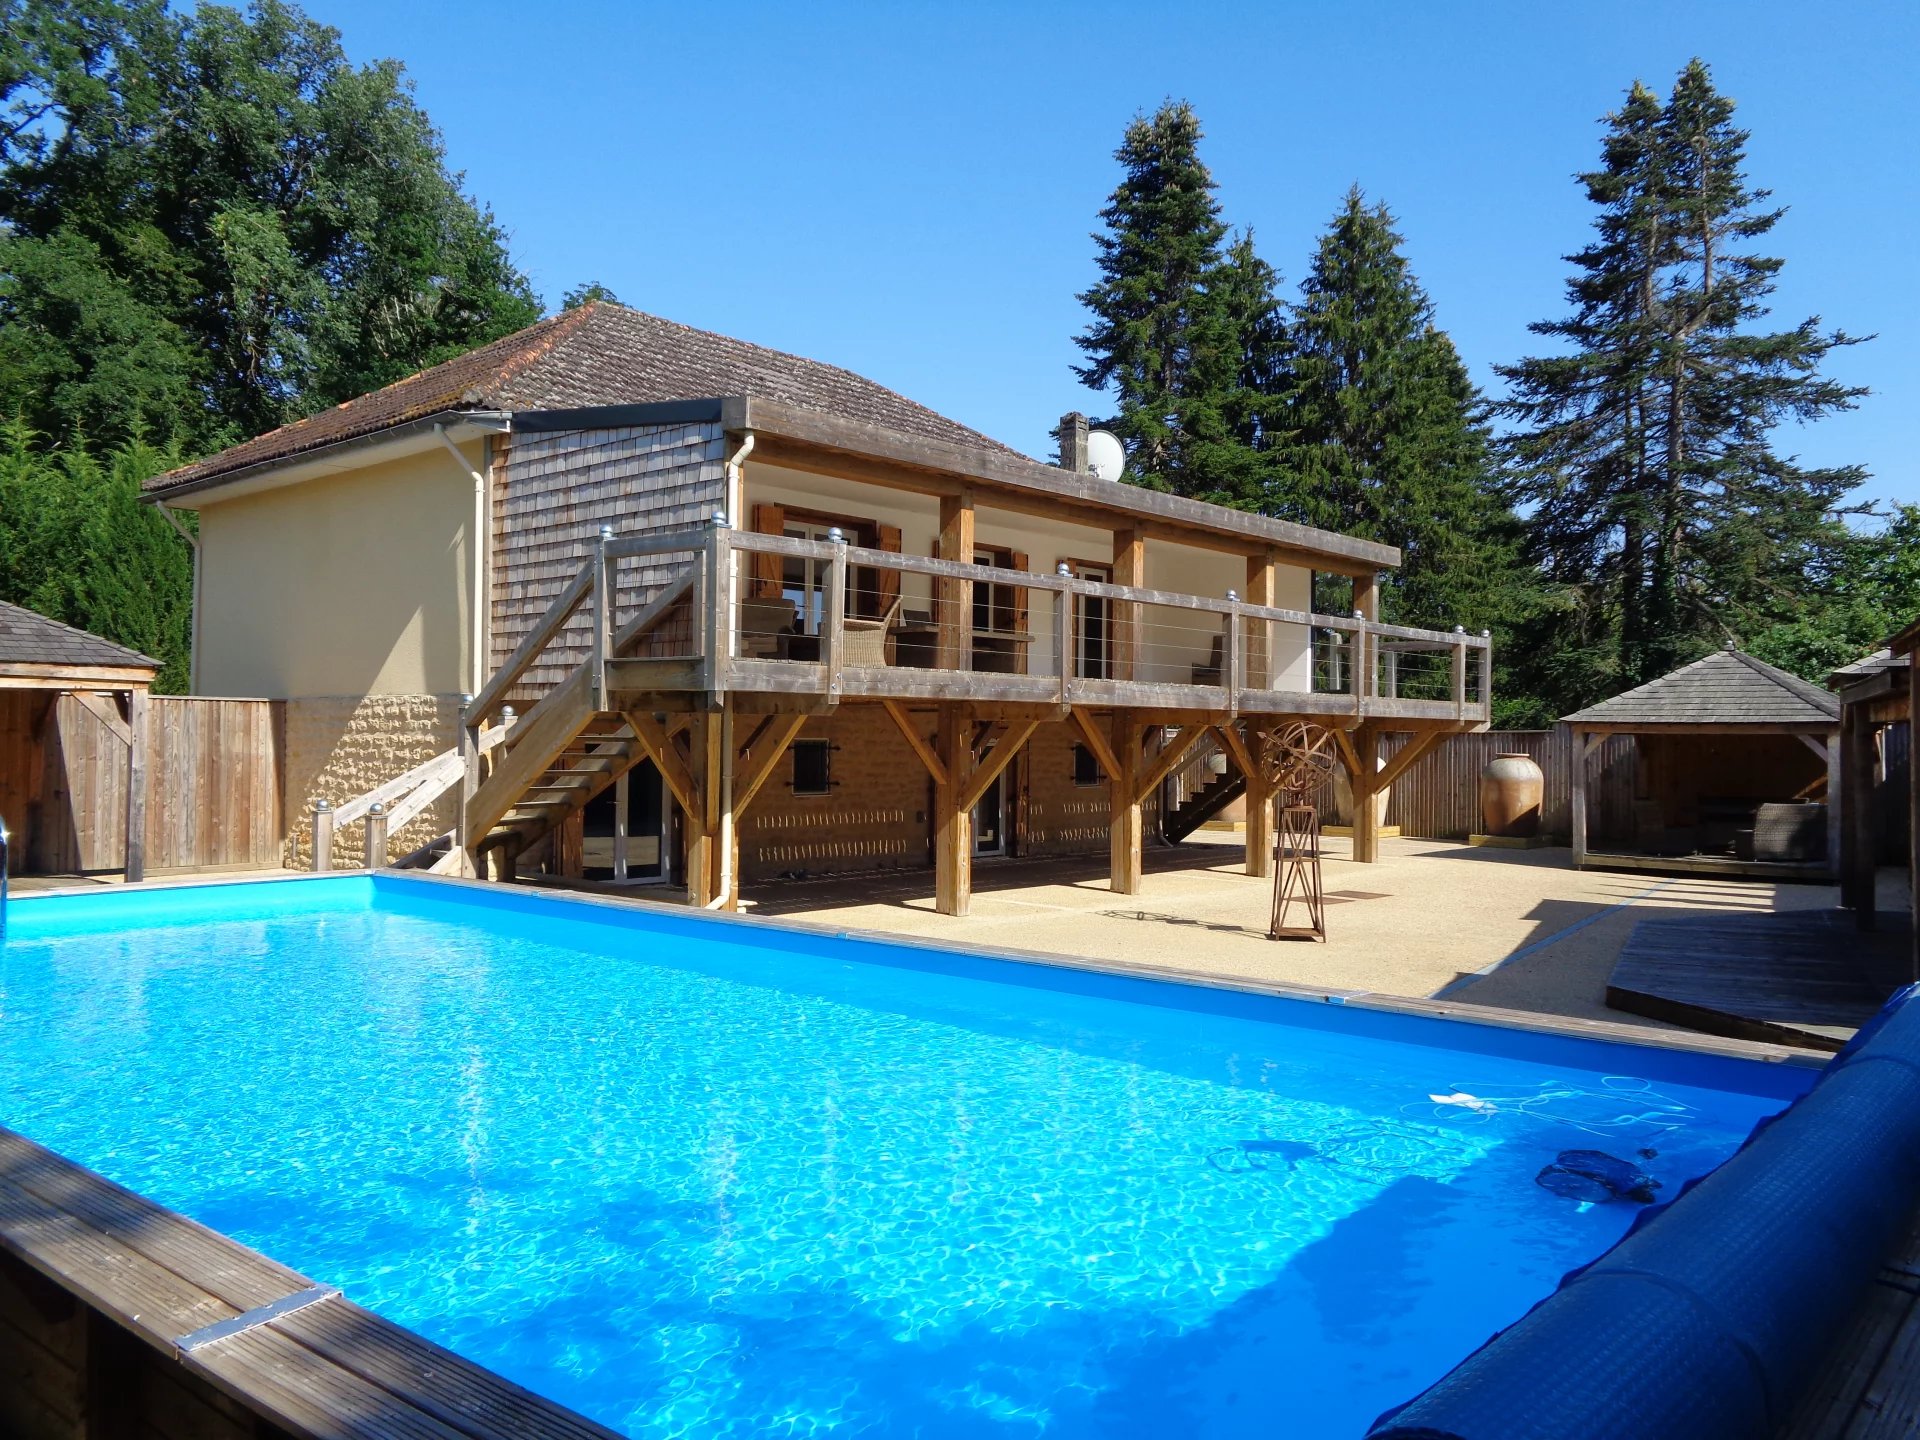 Spacious 3 bed house with heated swimming pool just 10 minutes from Sarlat